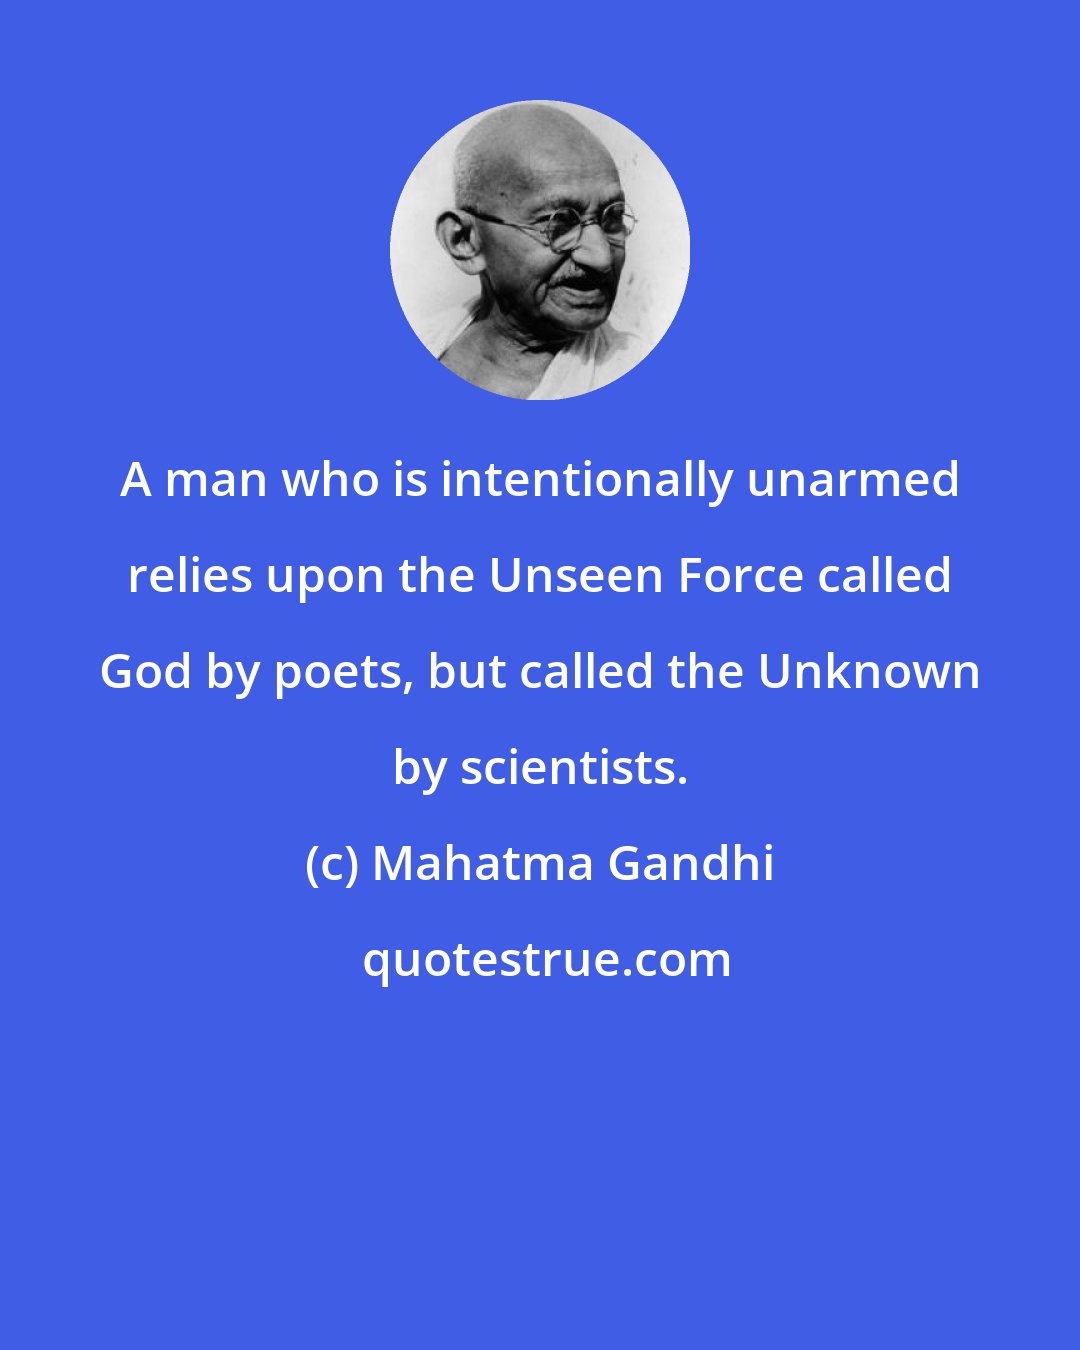 Mahatma Gandhi: A man who is intentionally unarmed relies upon the Unseen Force called God by poets, but called the Unknown by scientists.